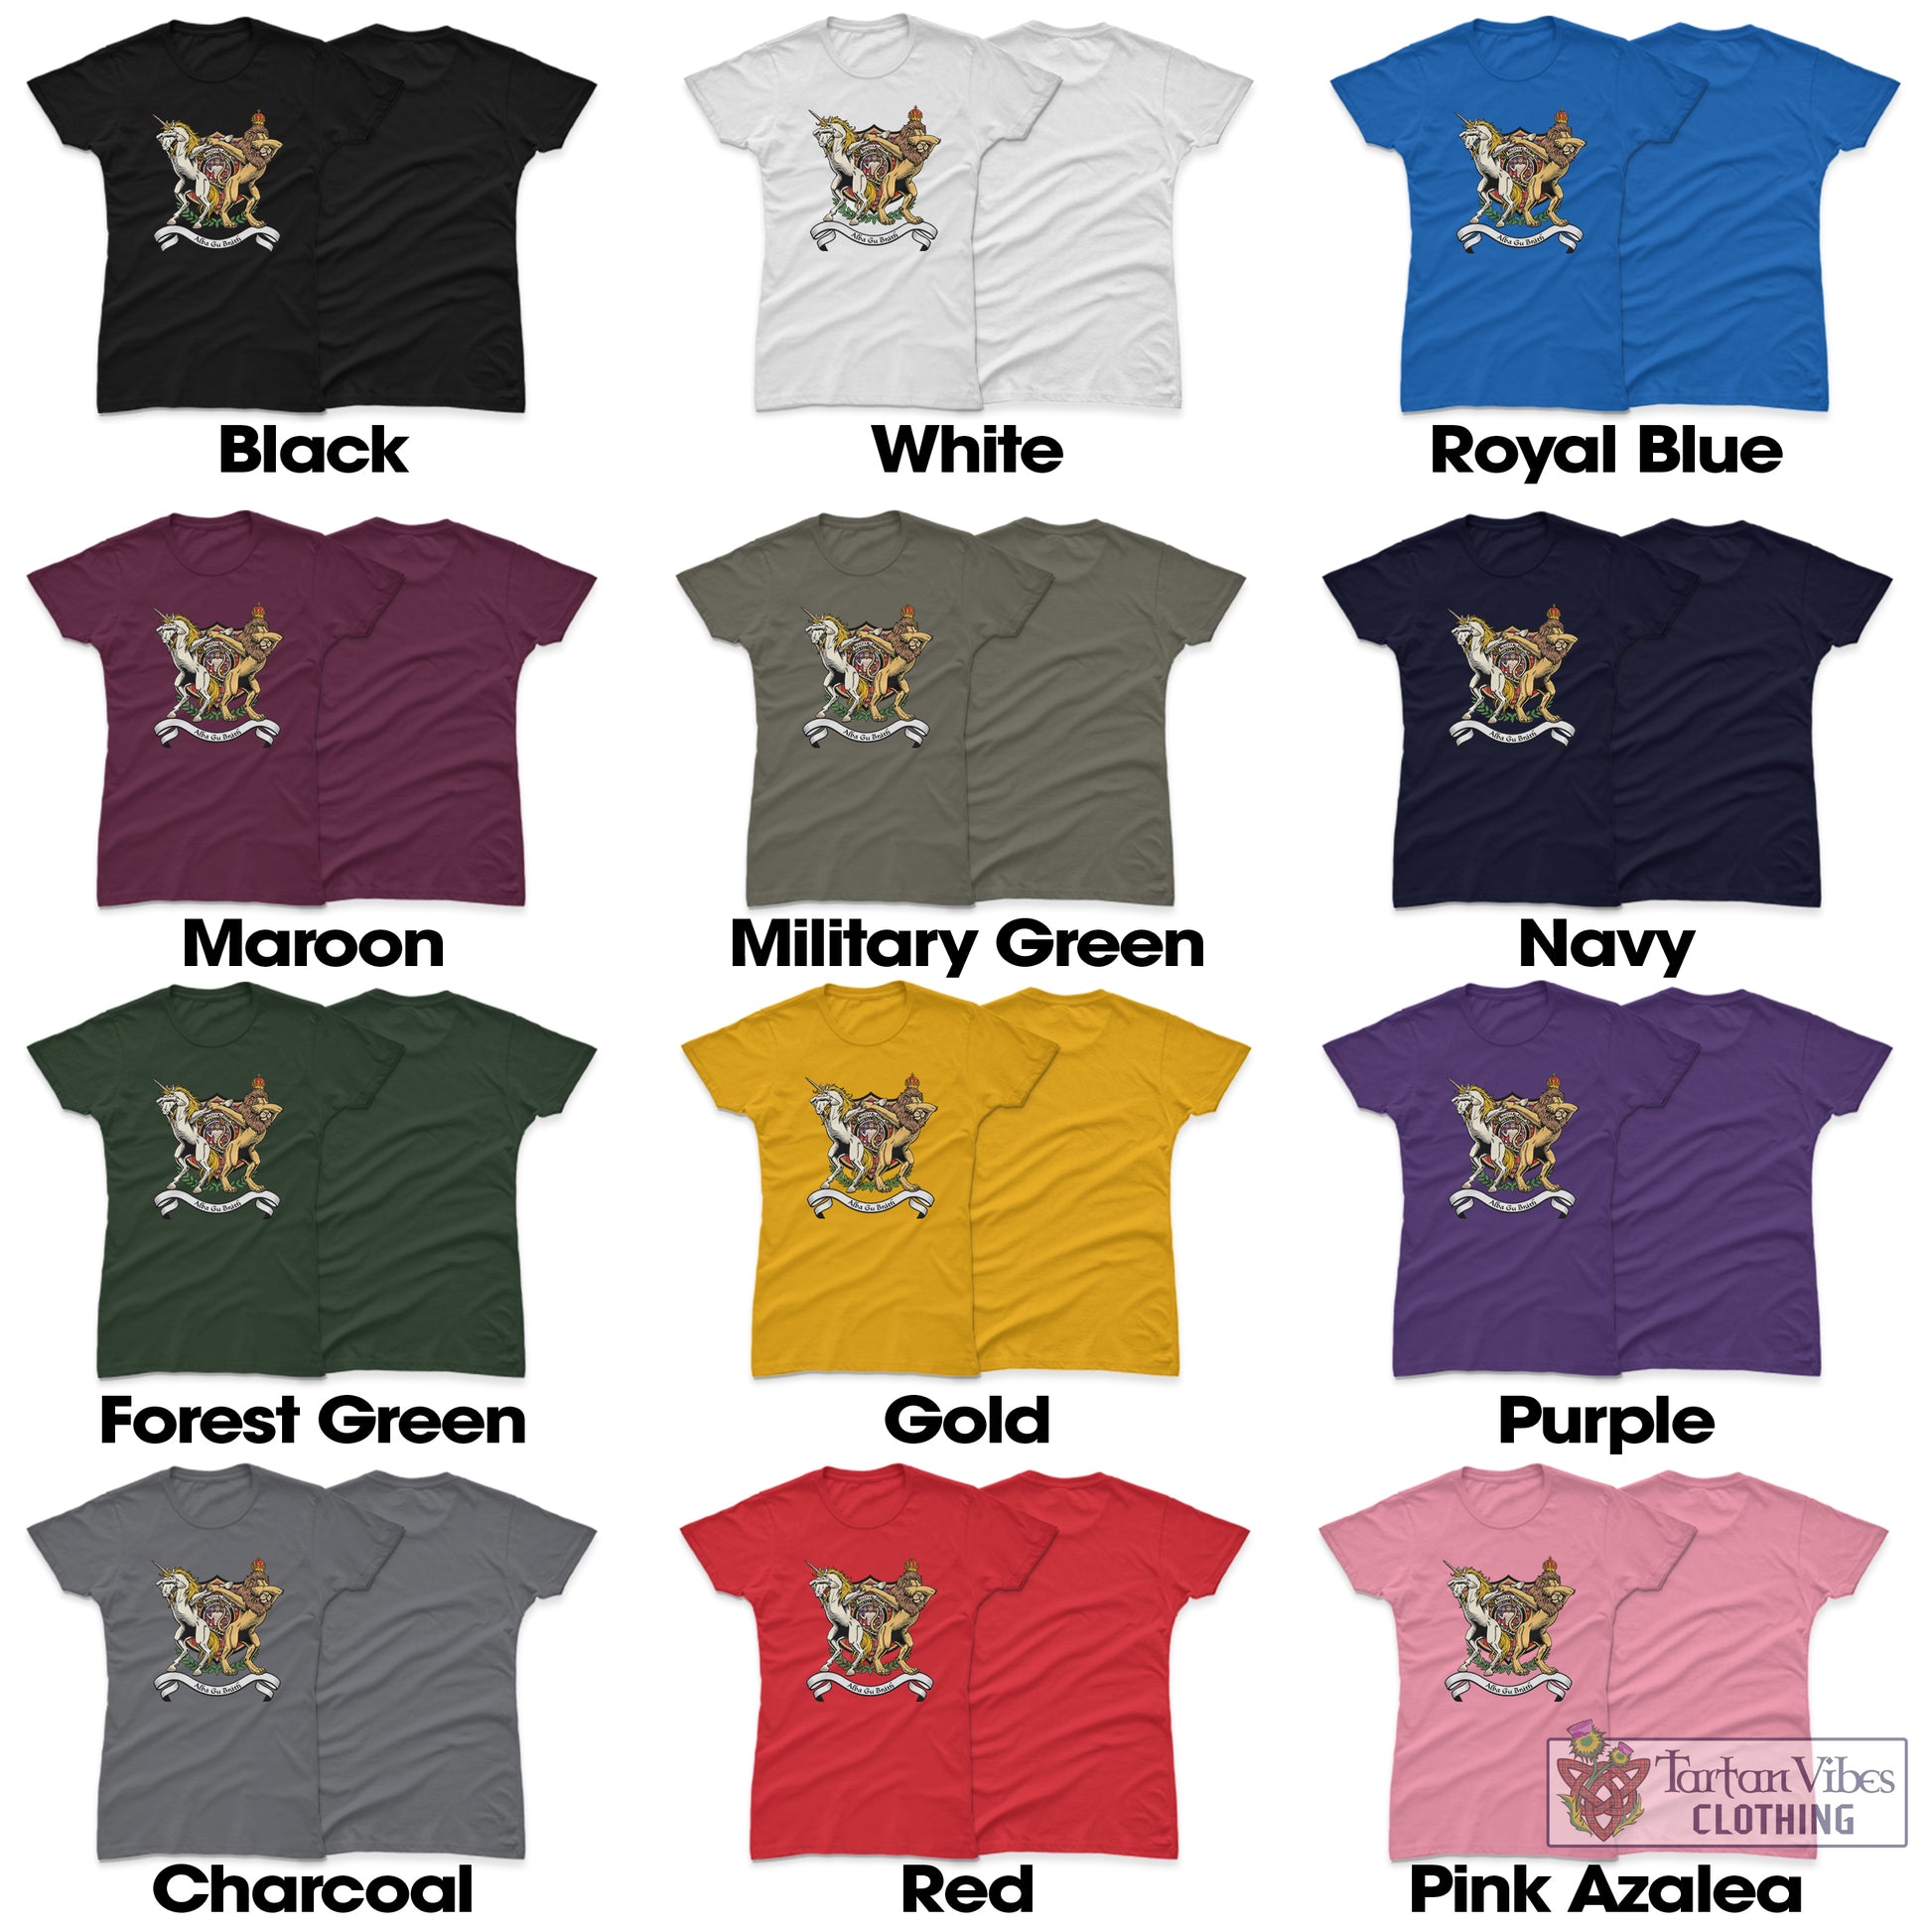 Tartan Vibes Clothing MacFarlane Modern Family Crest Cotton Women's T-Shirt with Scotland Royal Coat Of Arm Funny Style